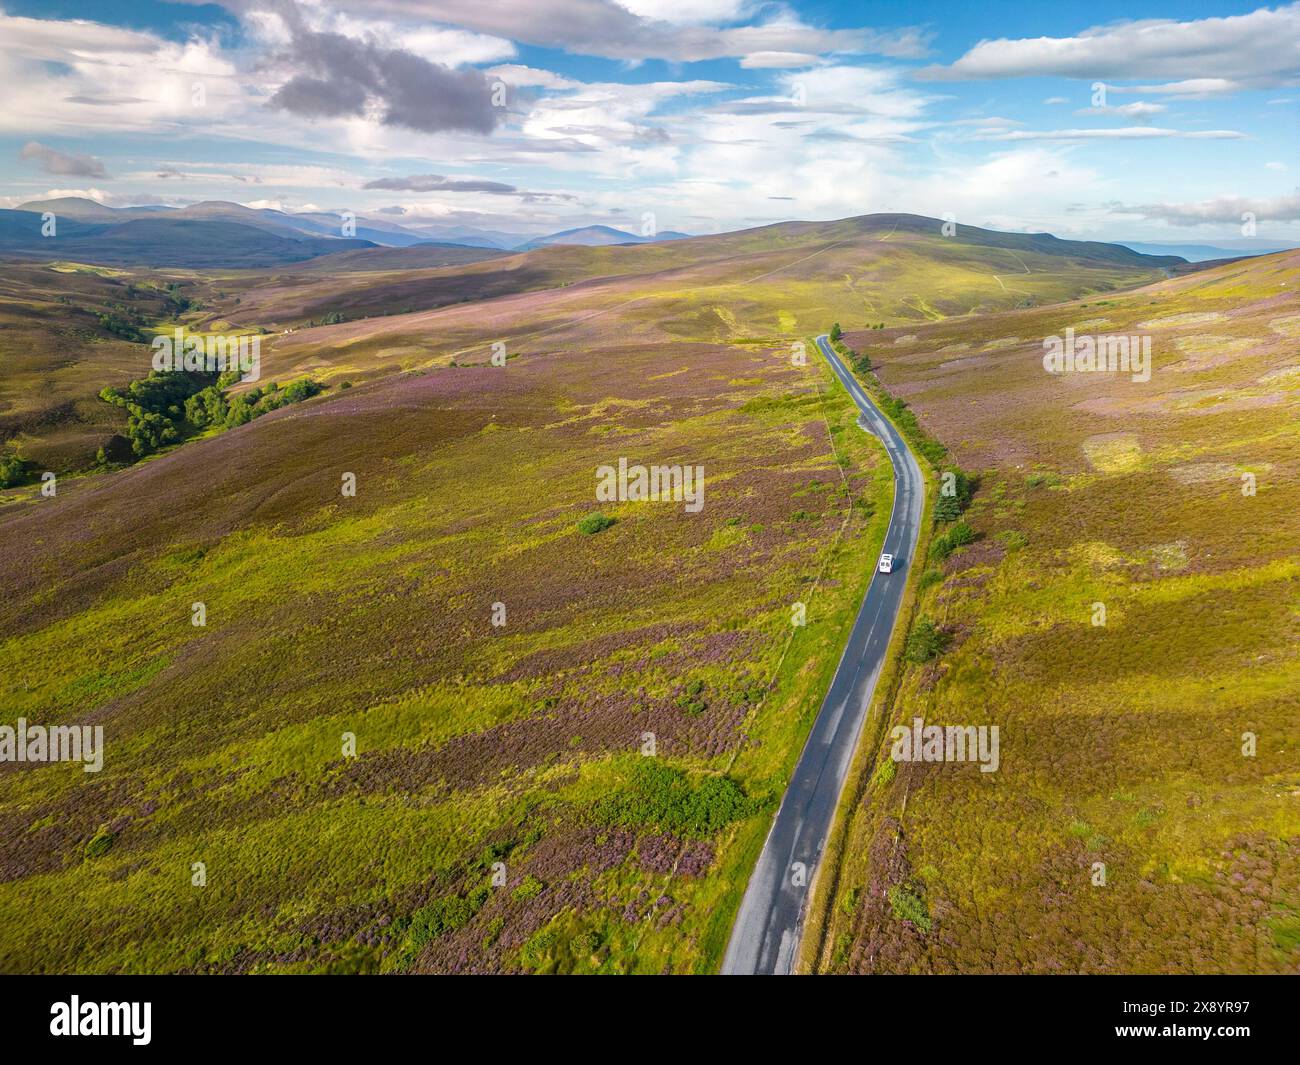 Scotland, Highlands, Cairngorms National Park, Grantown-on-Spey, heathland around scenic route A939 between Grantown-on-Spey and Tomintoul (aerial vie Stock Photo